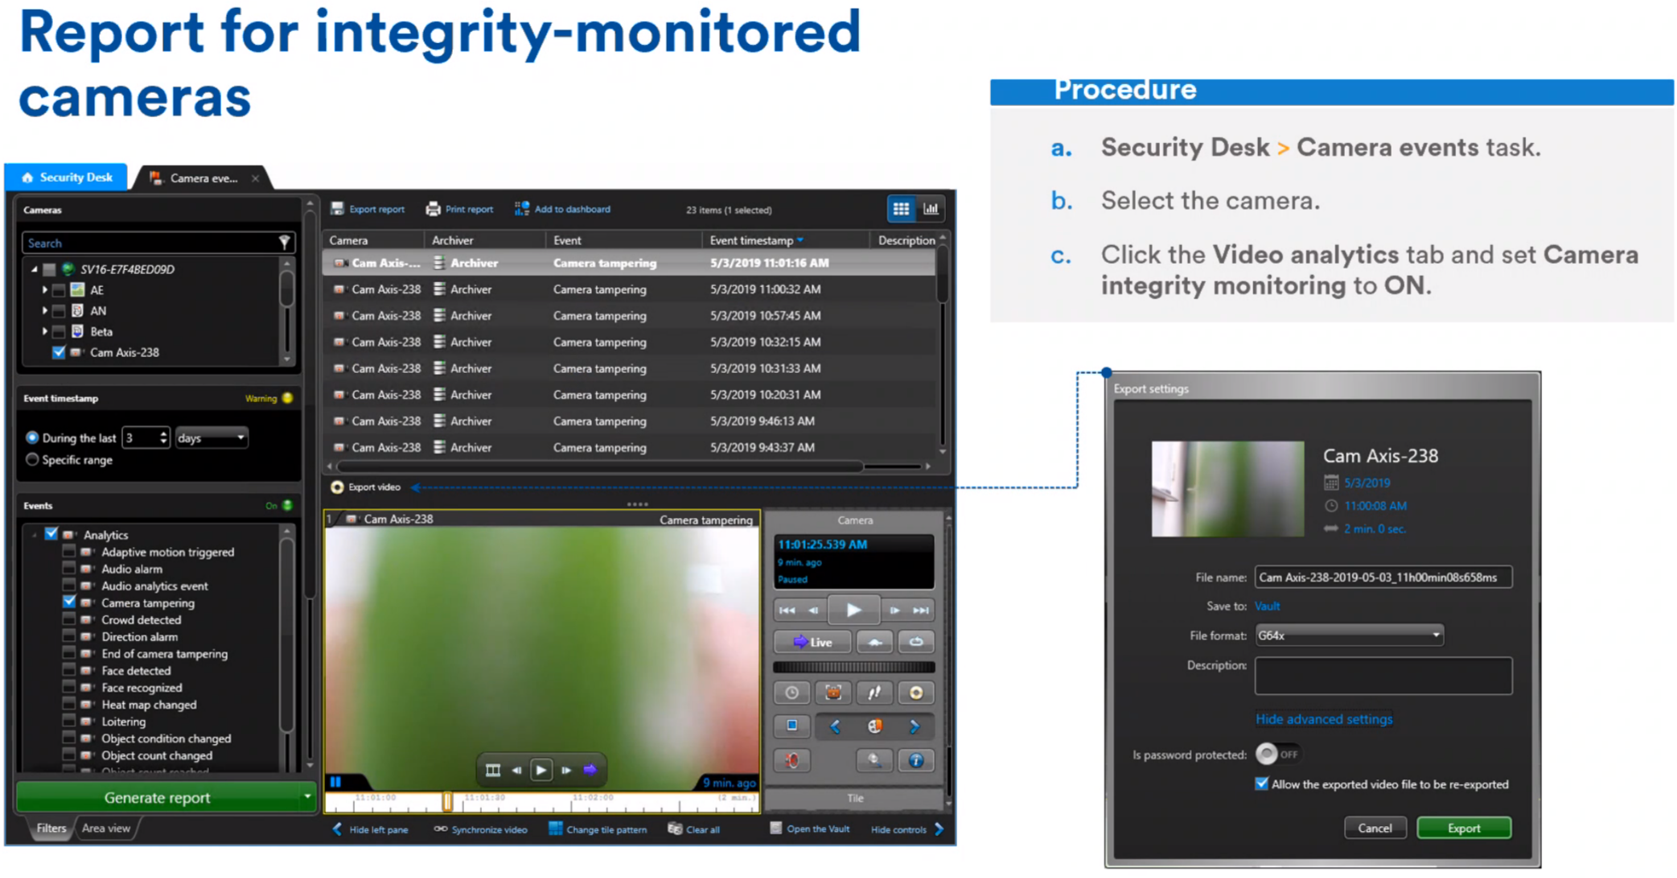 Report for integrity-monitored cameras. Image by Genetec.